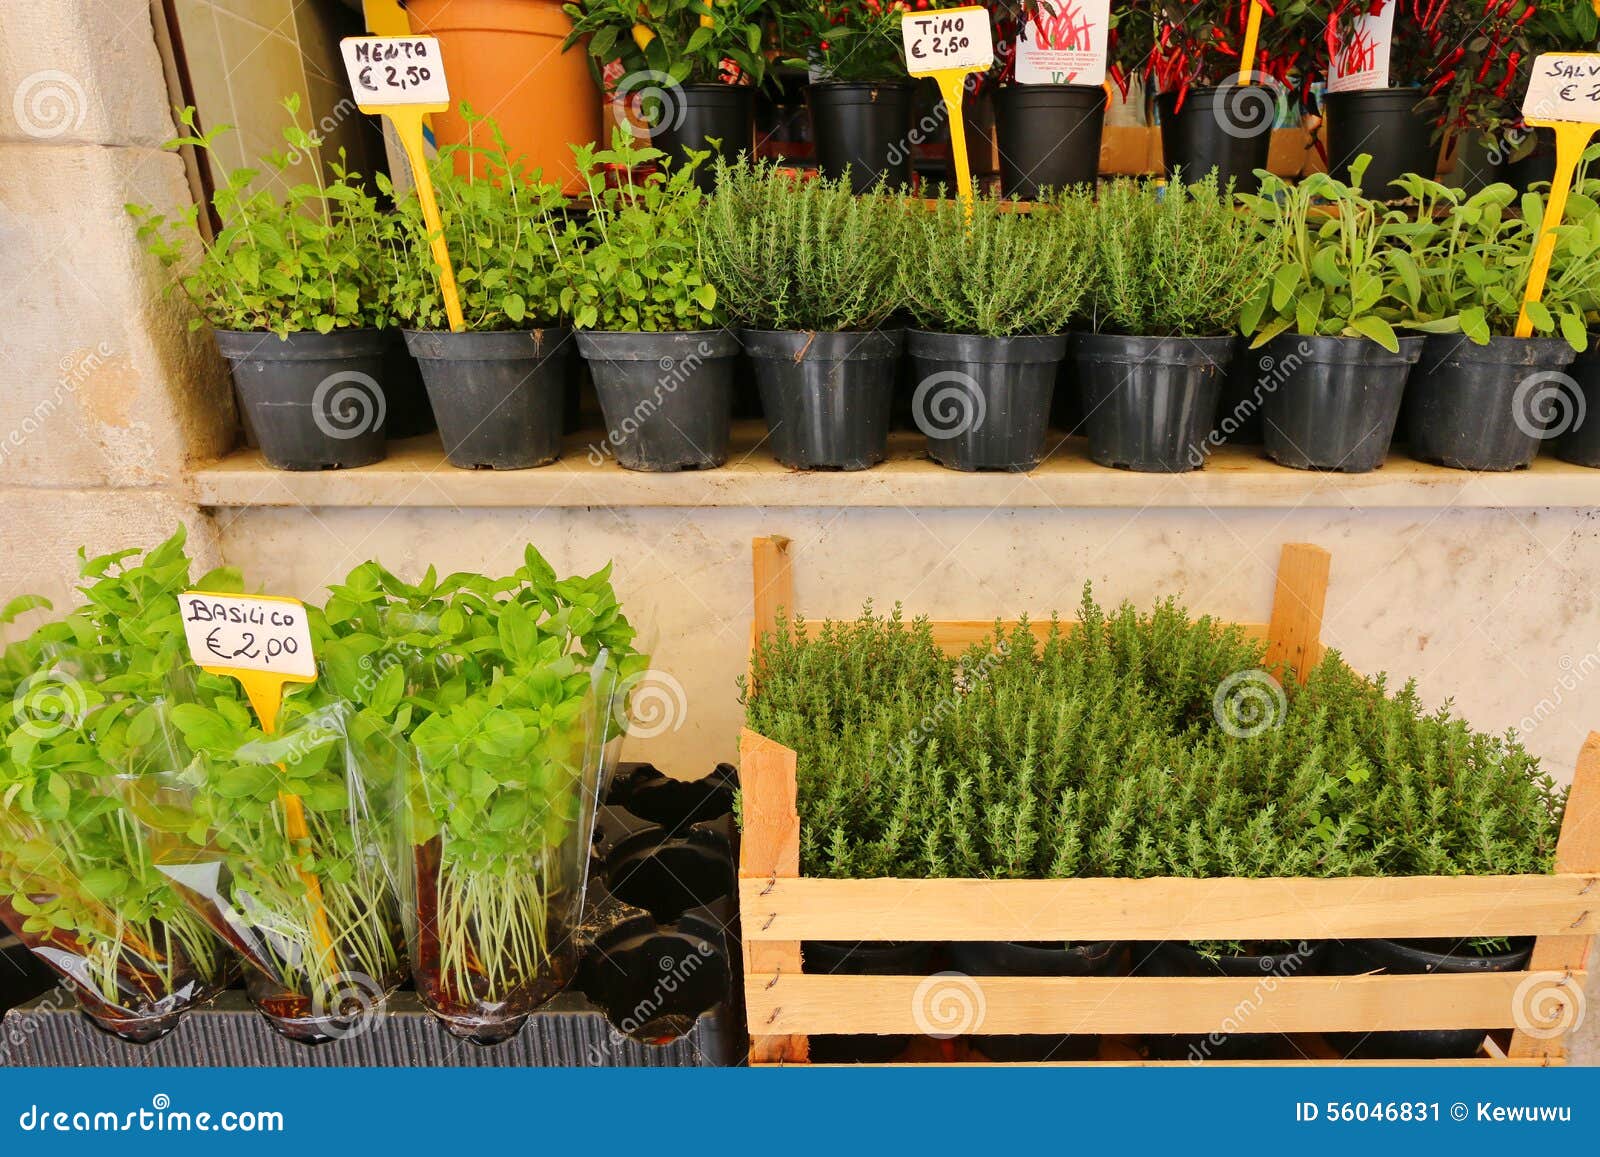 different types of fresh herbs in pots for sale